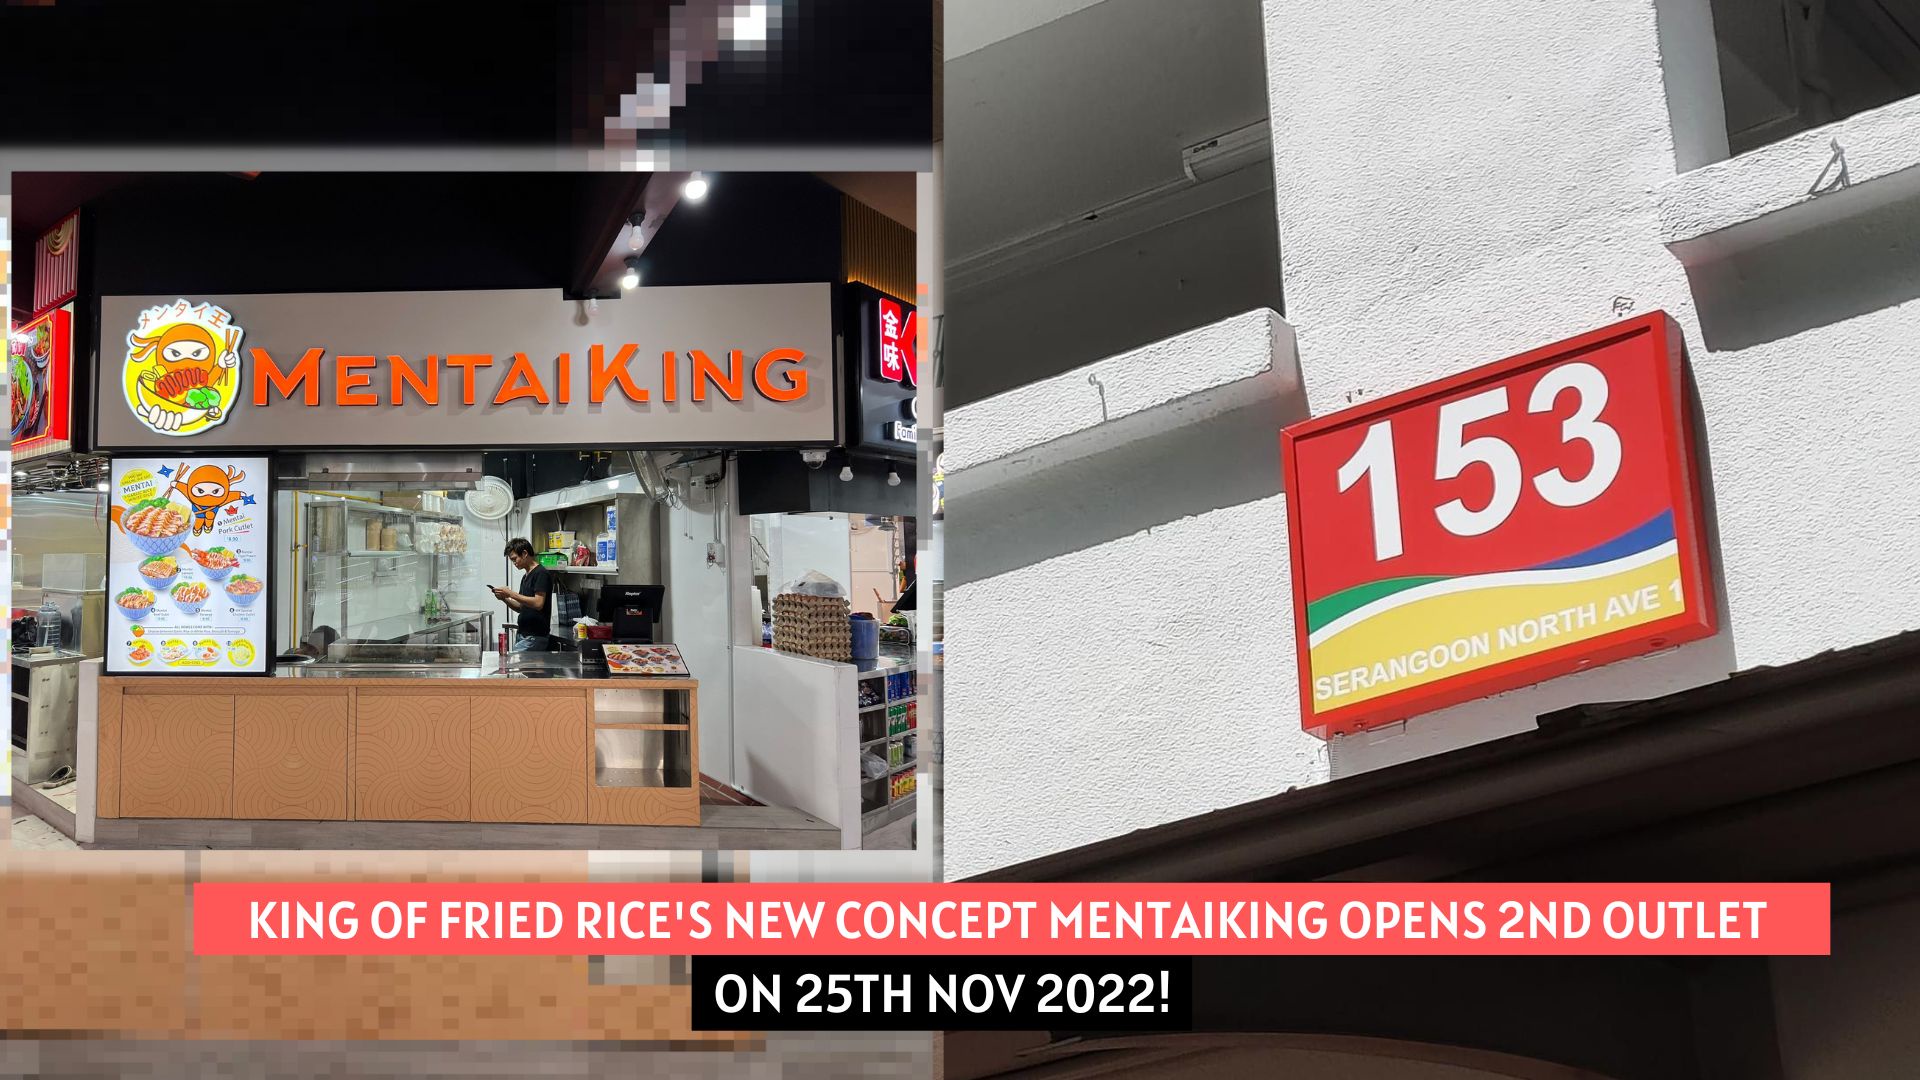 King of Fried Rice’s New Concept, MentaiKing, Opens 2nd Outlet in Serangoon, on 25th Nov 2022! featured image